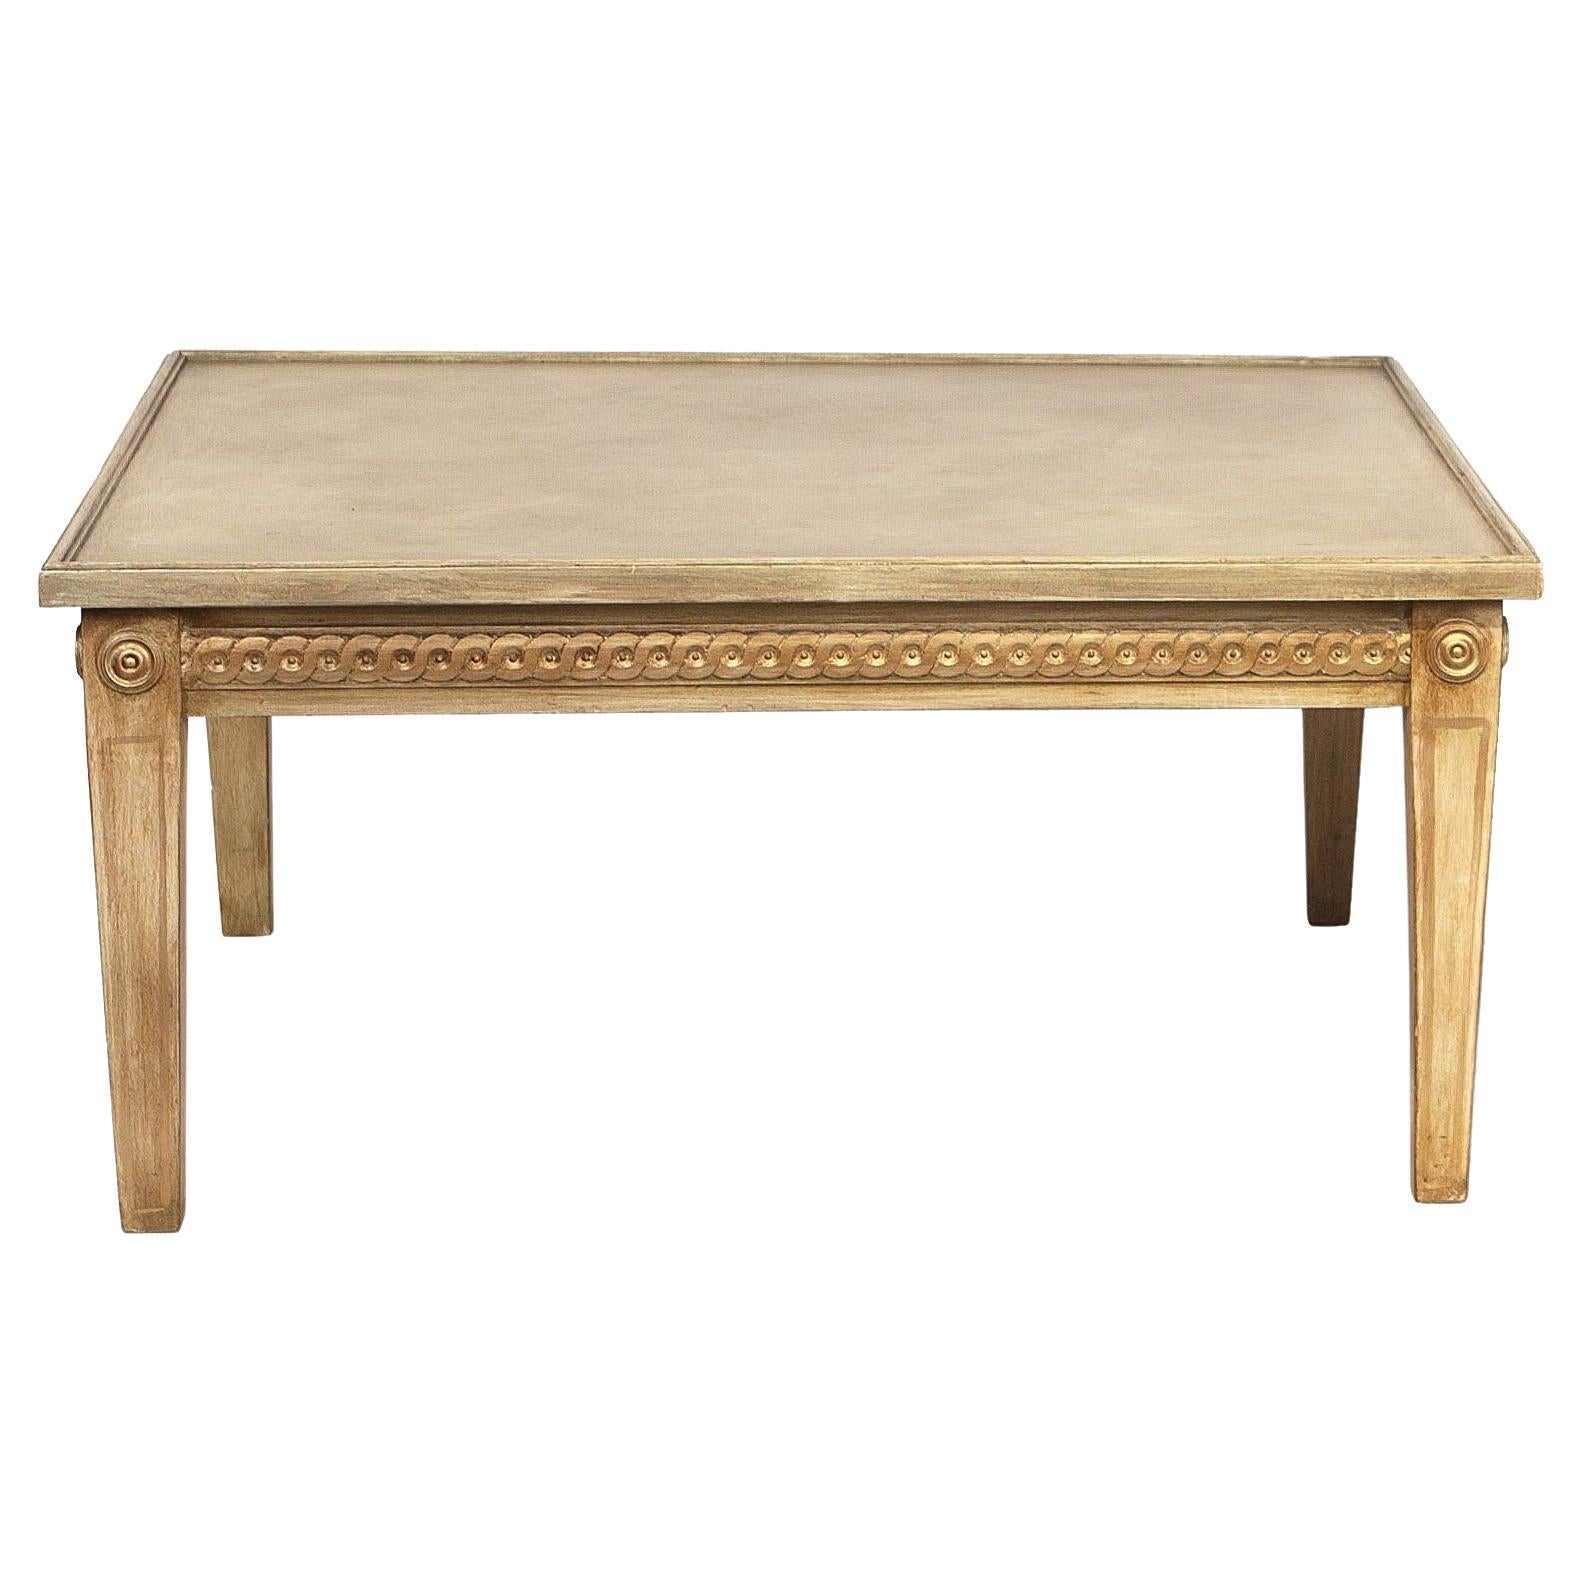 Center table, by Estanis Aguilar For Sale